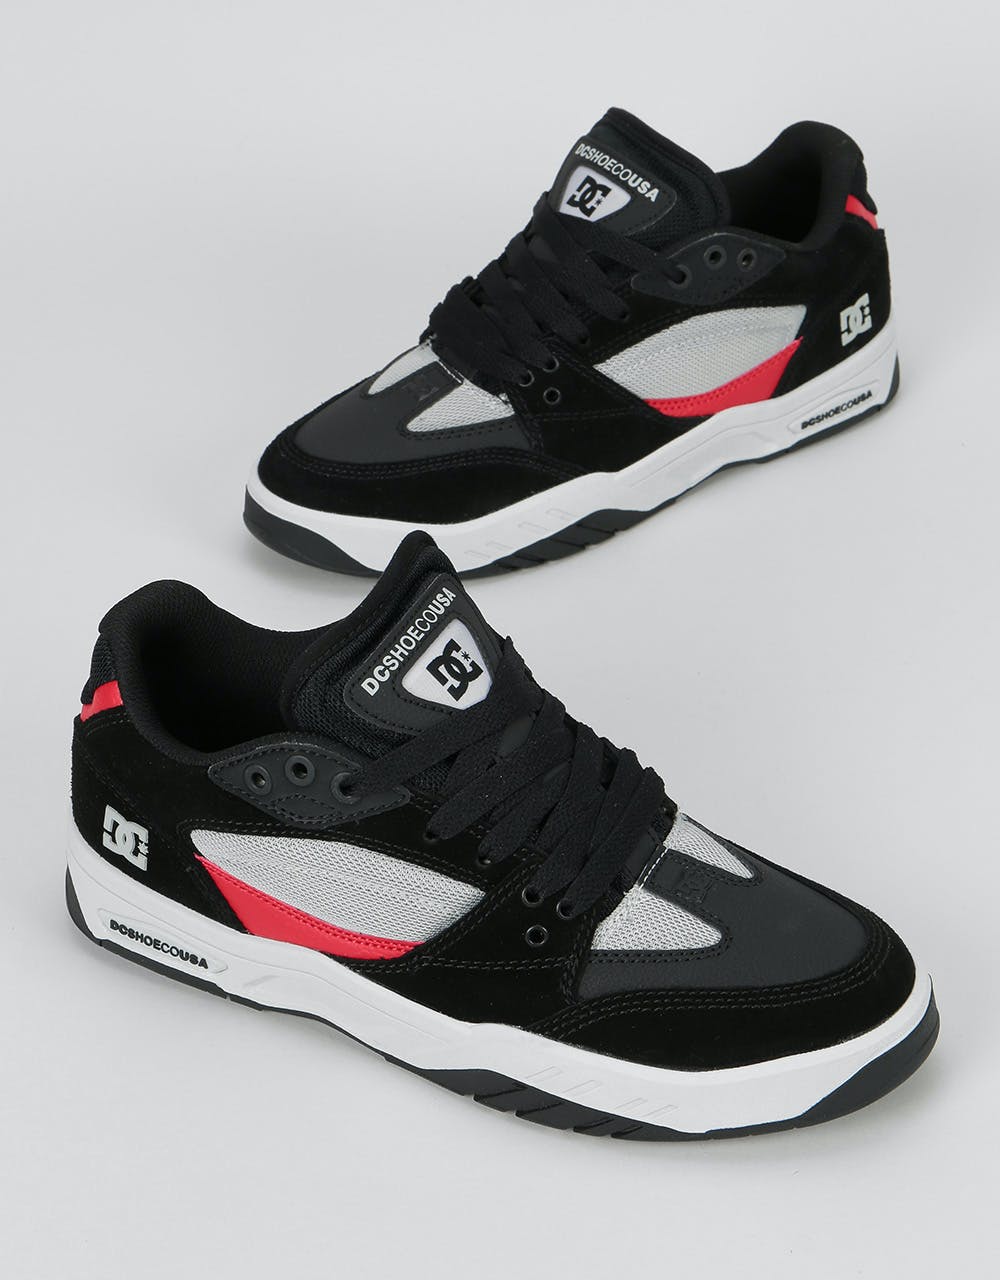 DC Maswell Skate Shoes - Grey/Black/Red